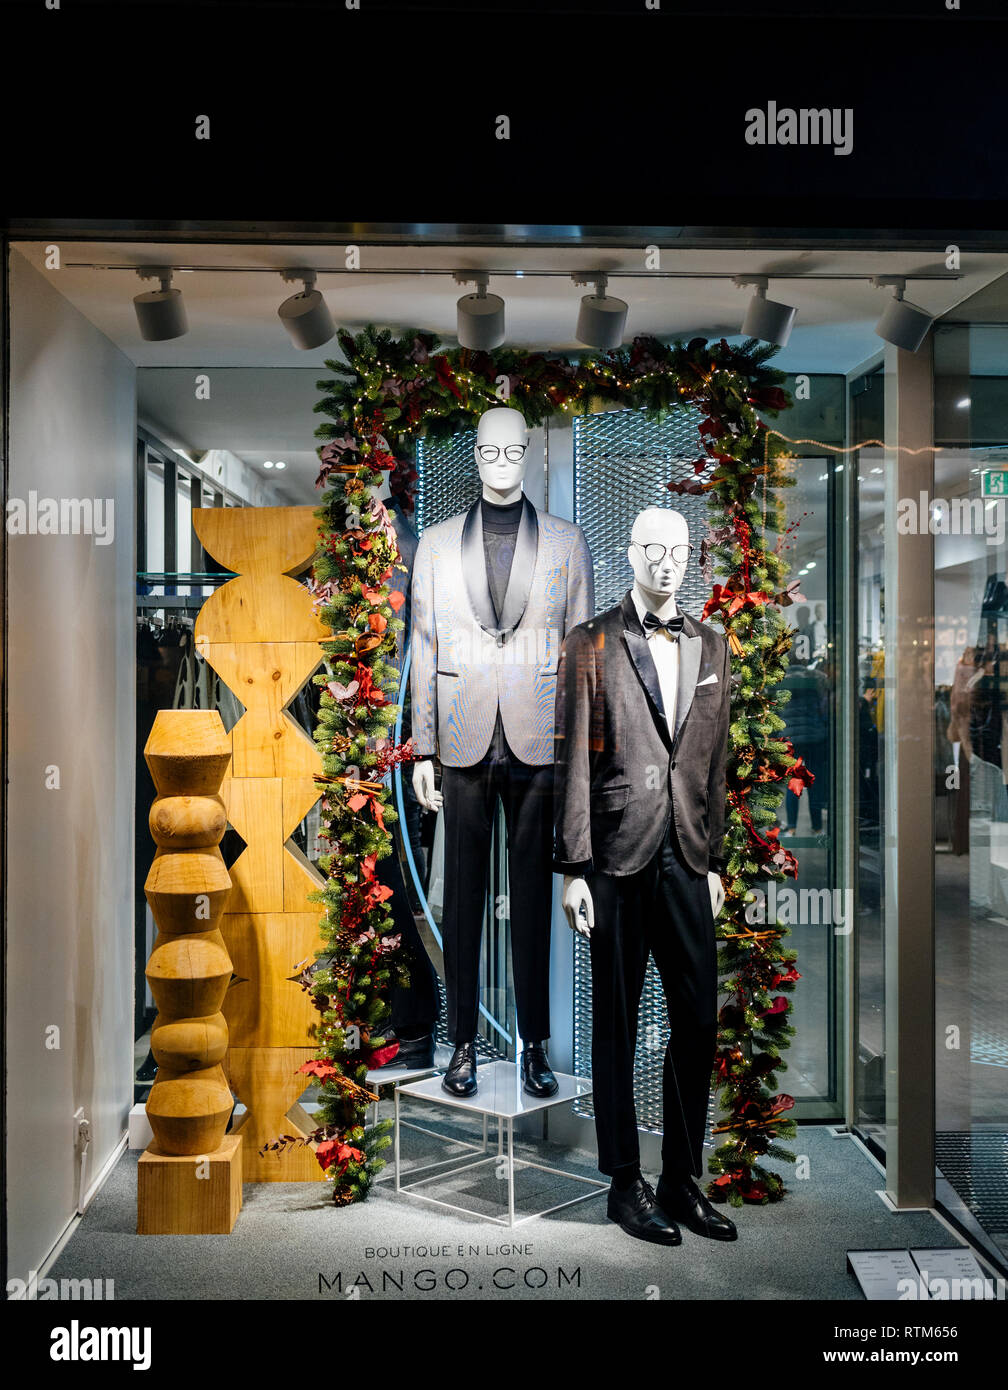 STRASBOURG, FRANCE - NOV 21, 2017: Silhouettes of couple walking in front  of the decorated Mango Store windows facade with manequins wearing latest  male fashion collection Stock Photo - Alamy